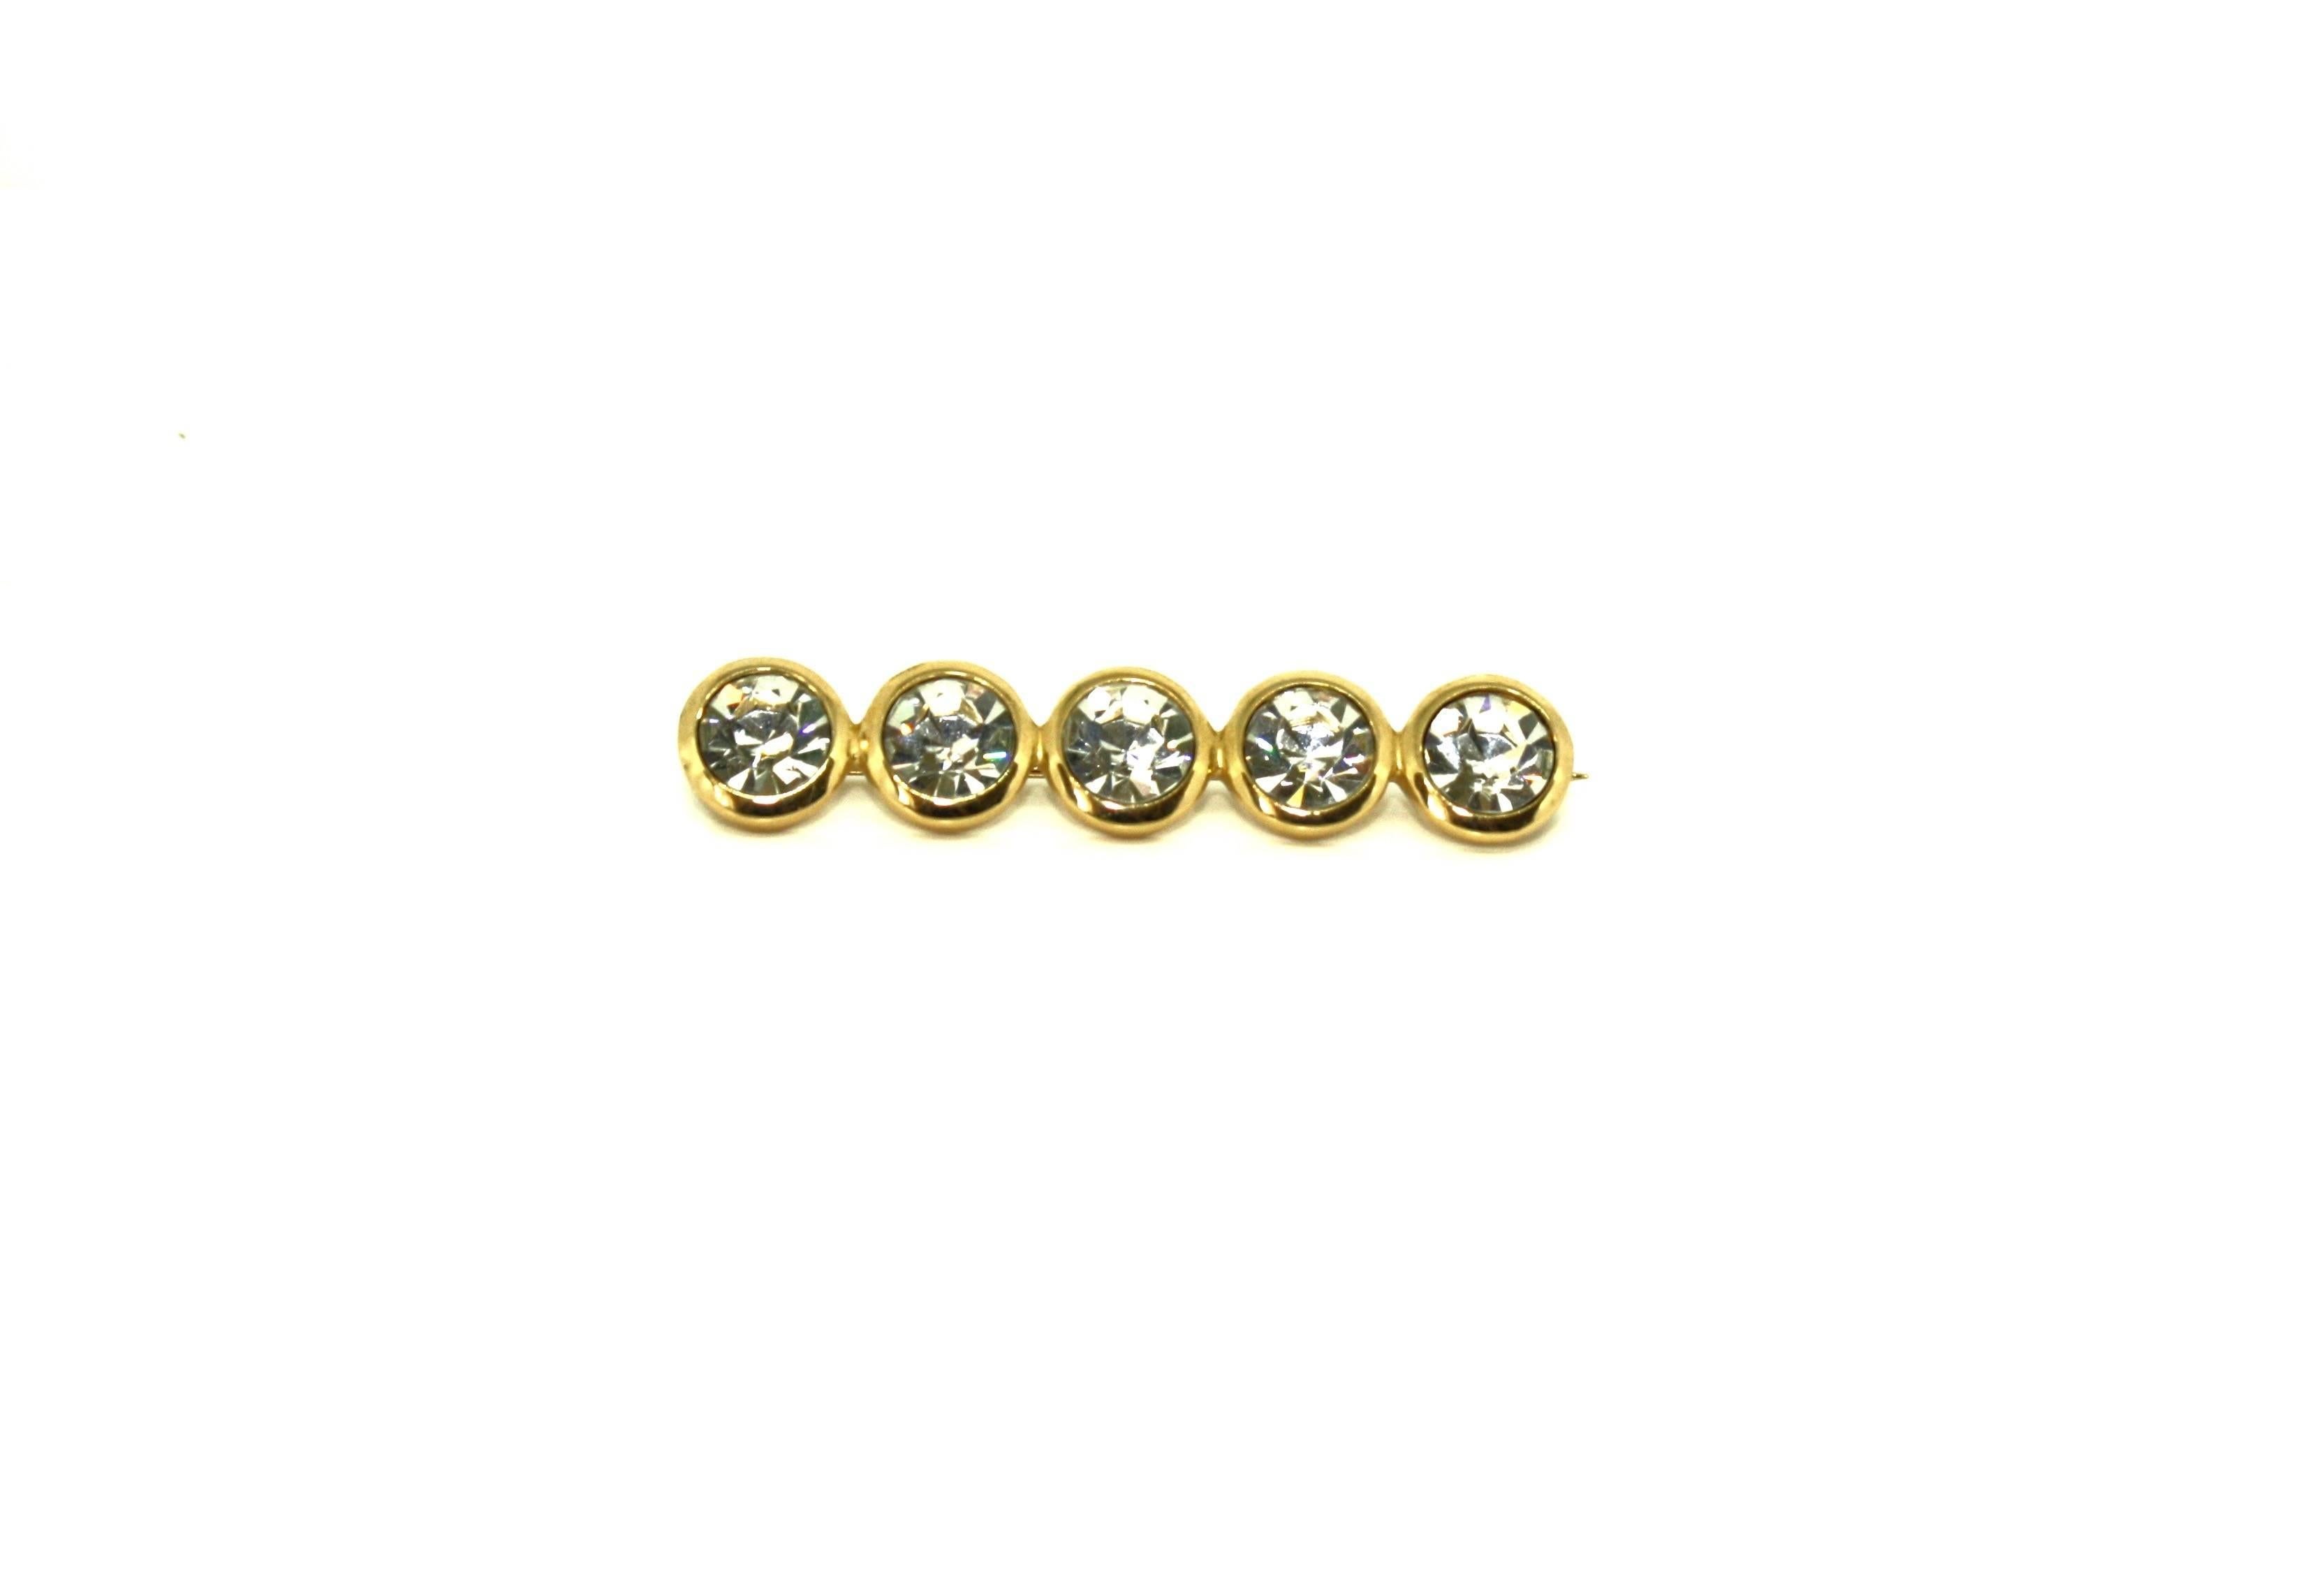 Five dazzling white faceted stones are set into gold plated base metal to make up this simple yet elegant brooch by Christian Dior. Each stone measures approximately 1cm in diameter. This brooch has been dated to the late 1980's and is marked with